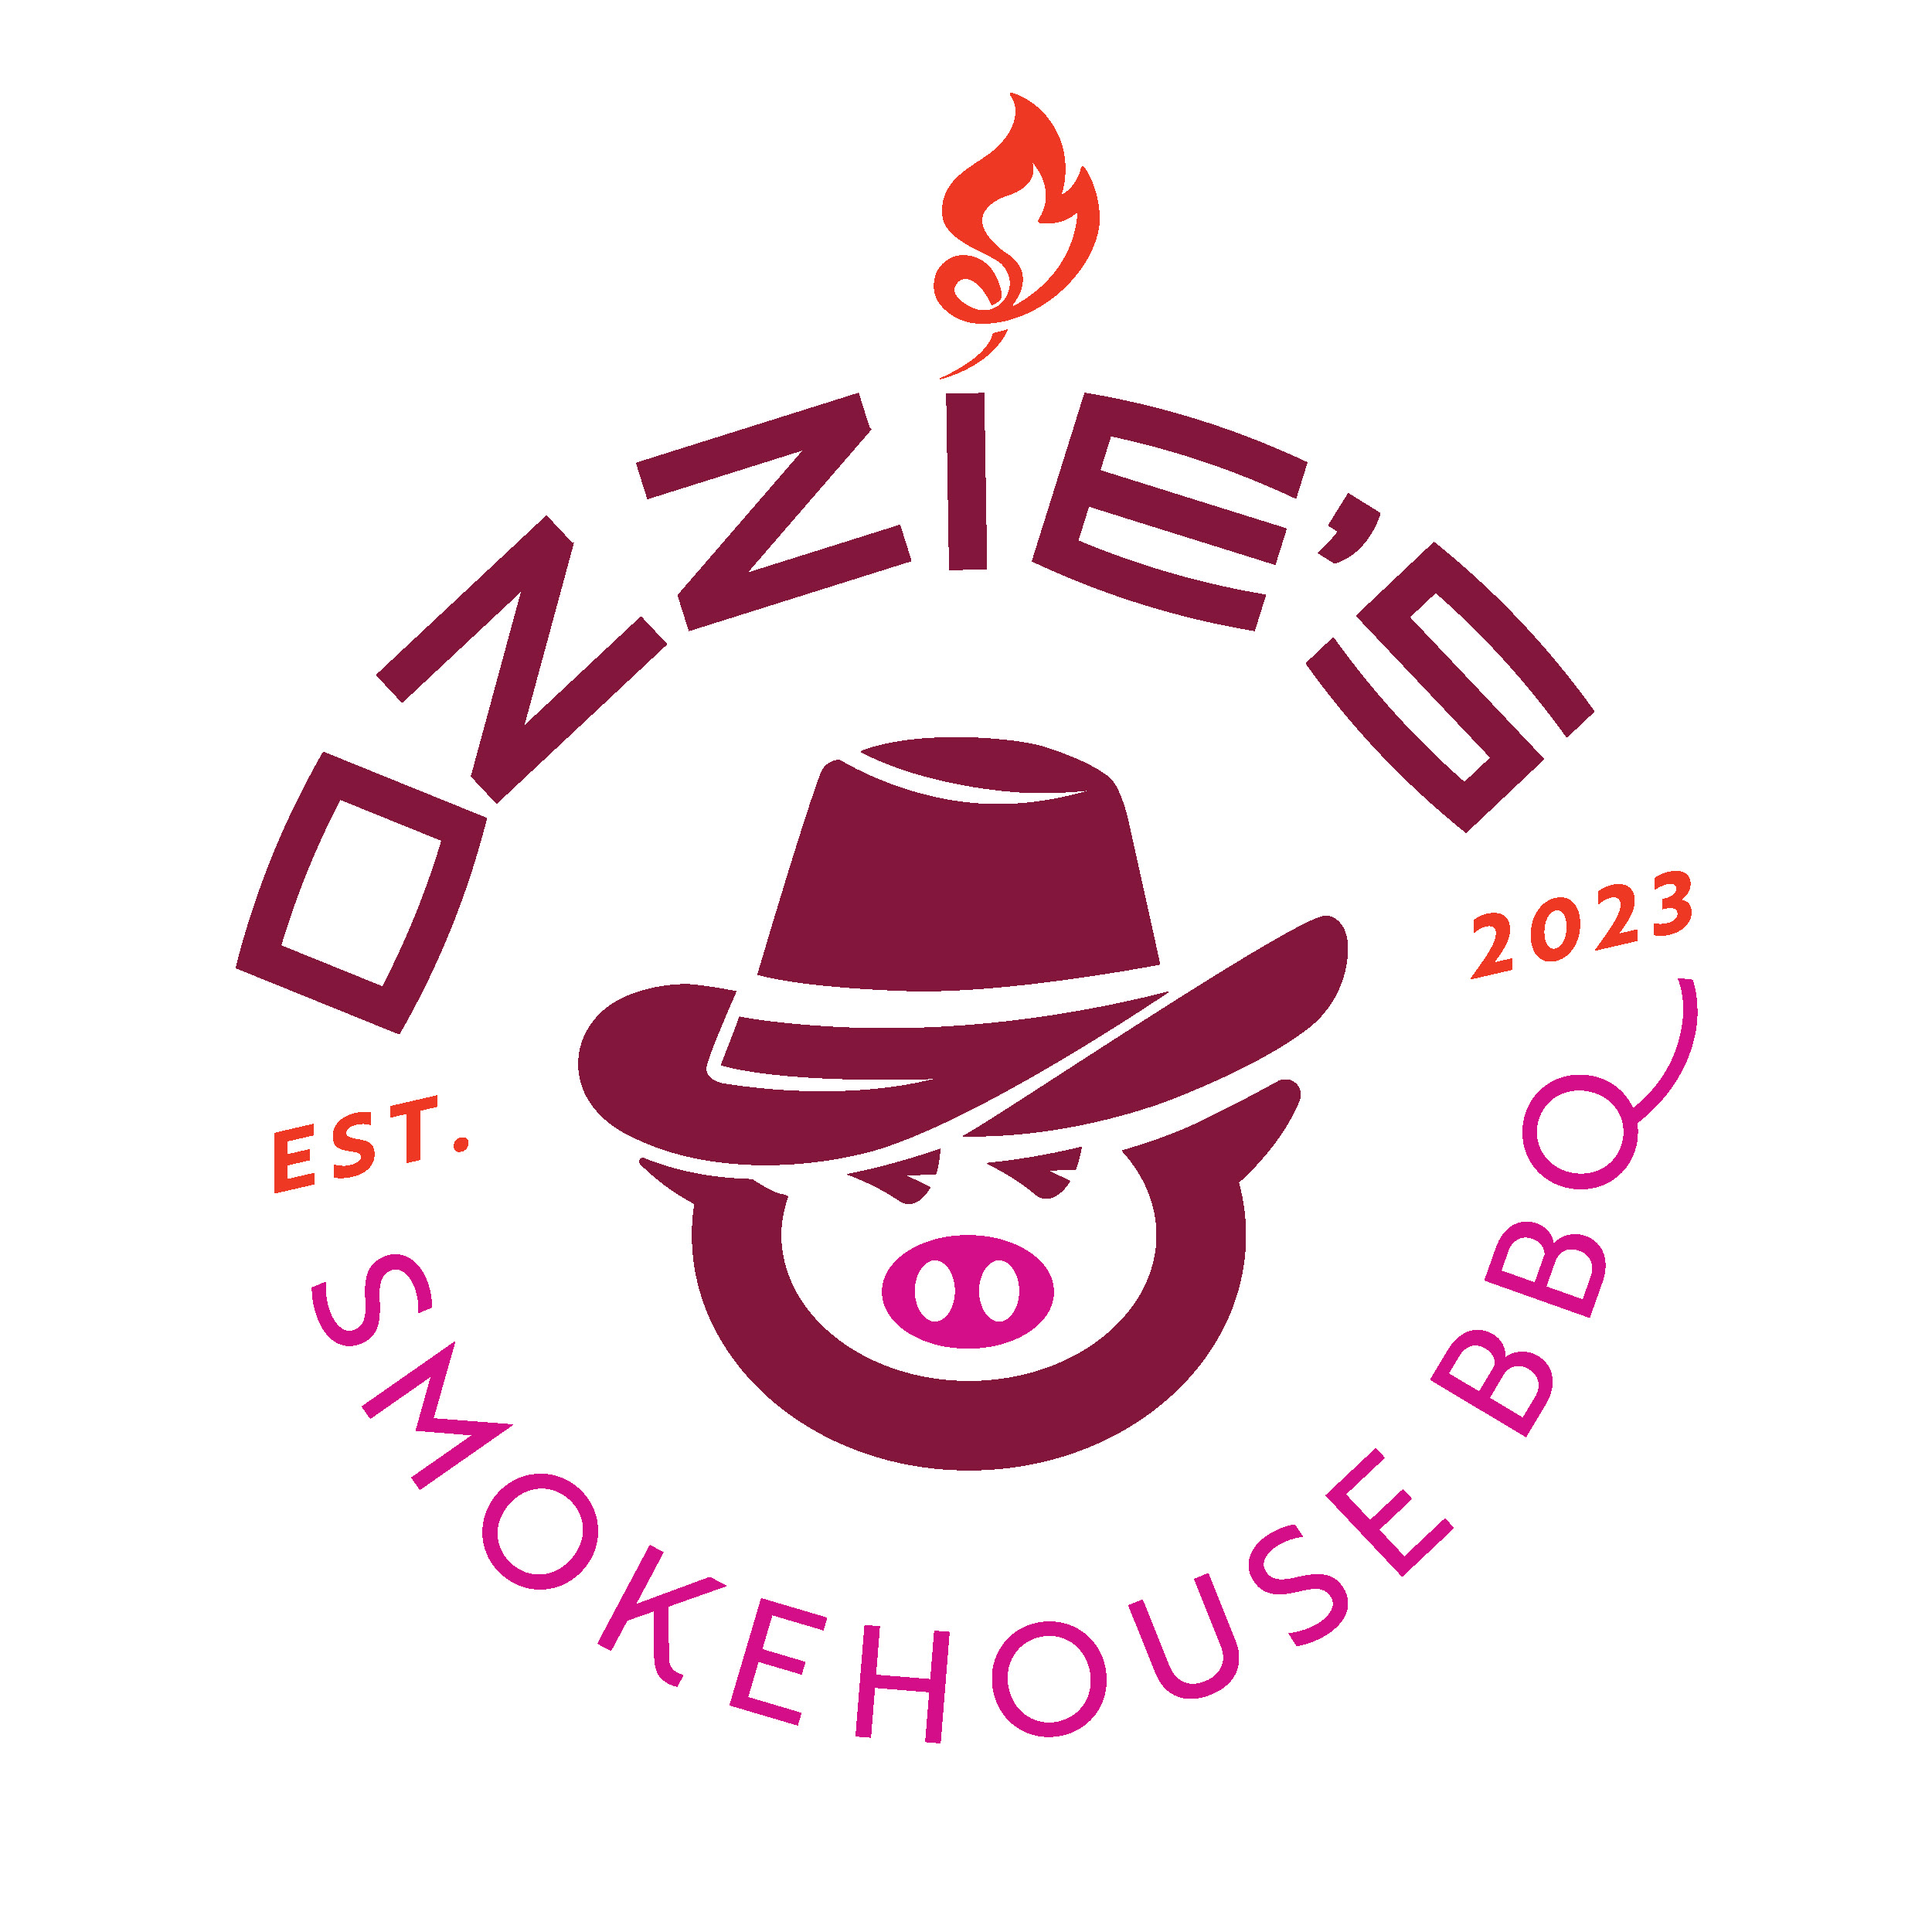 Ozzies_logo_badge logo design by logo designer Neon Pig Creative for your inspiration and for the worlds largest logo competition